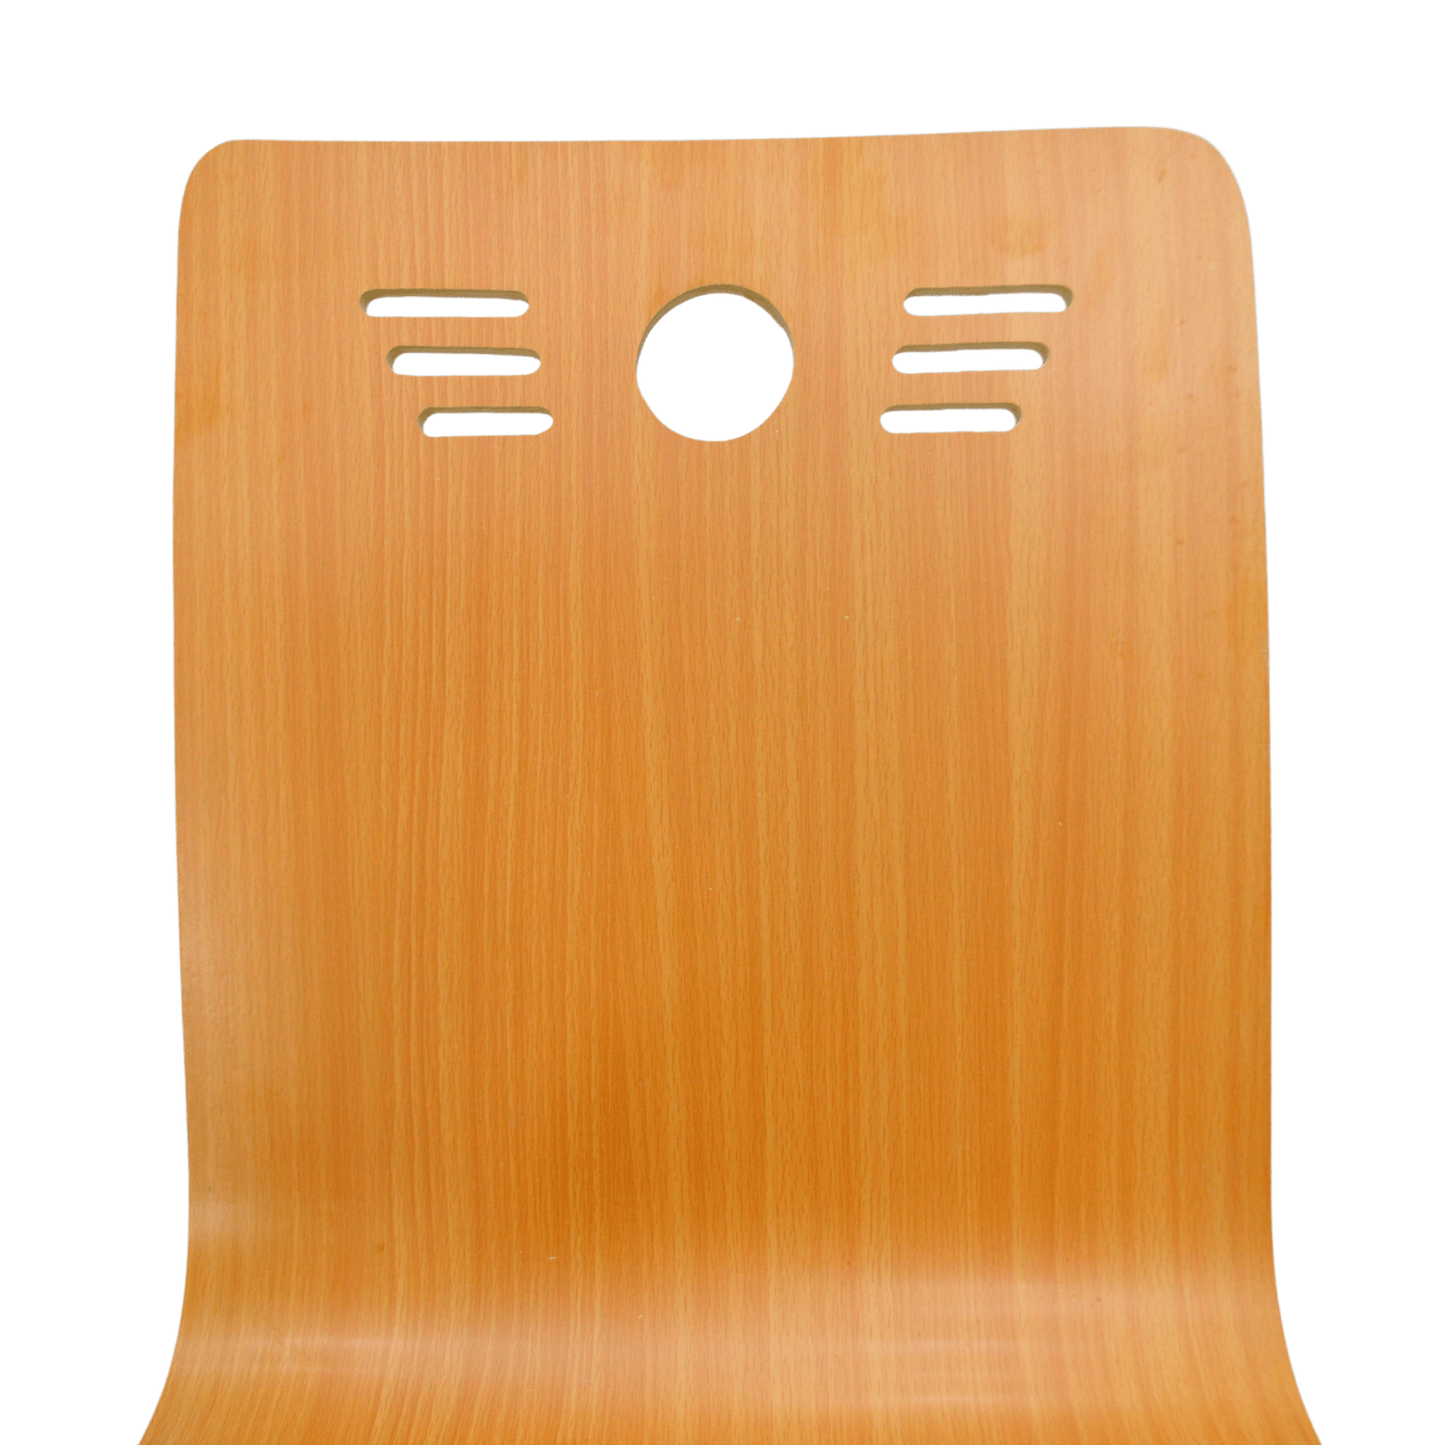 Canteen Chair (FT-H20) Brown